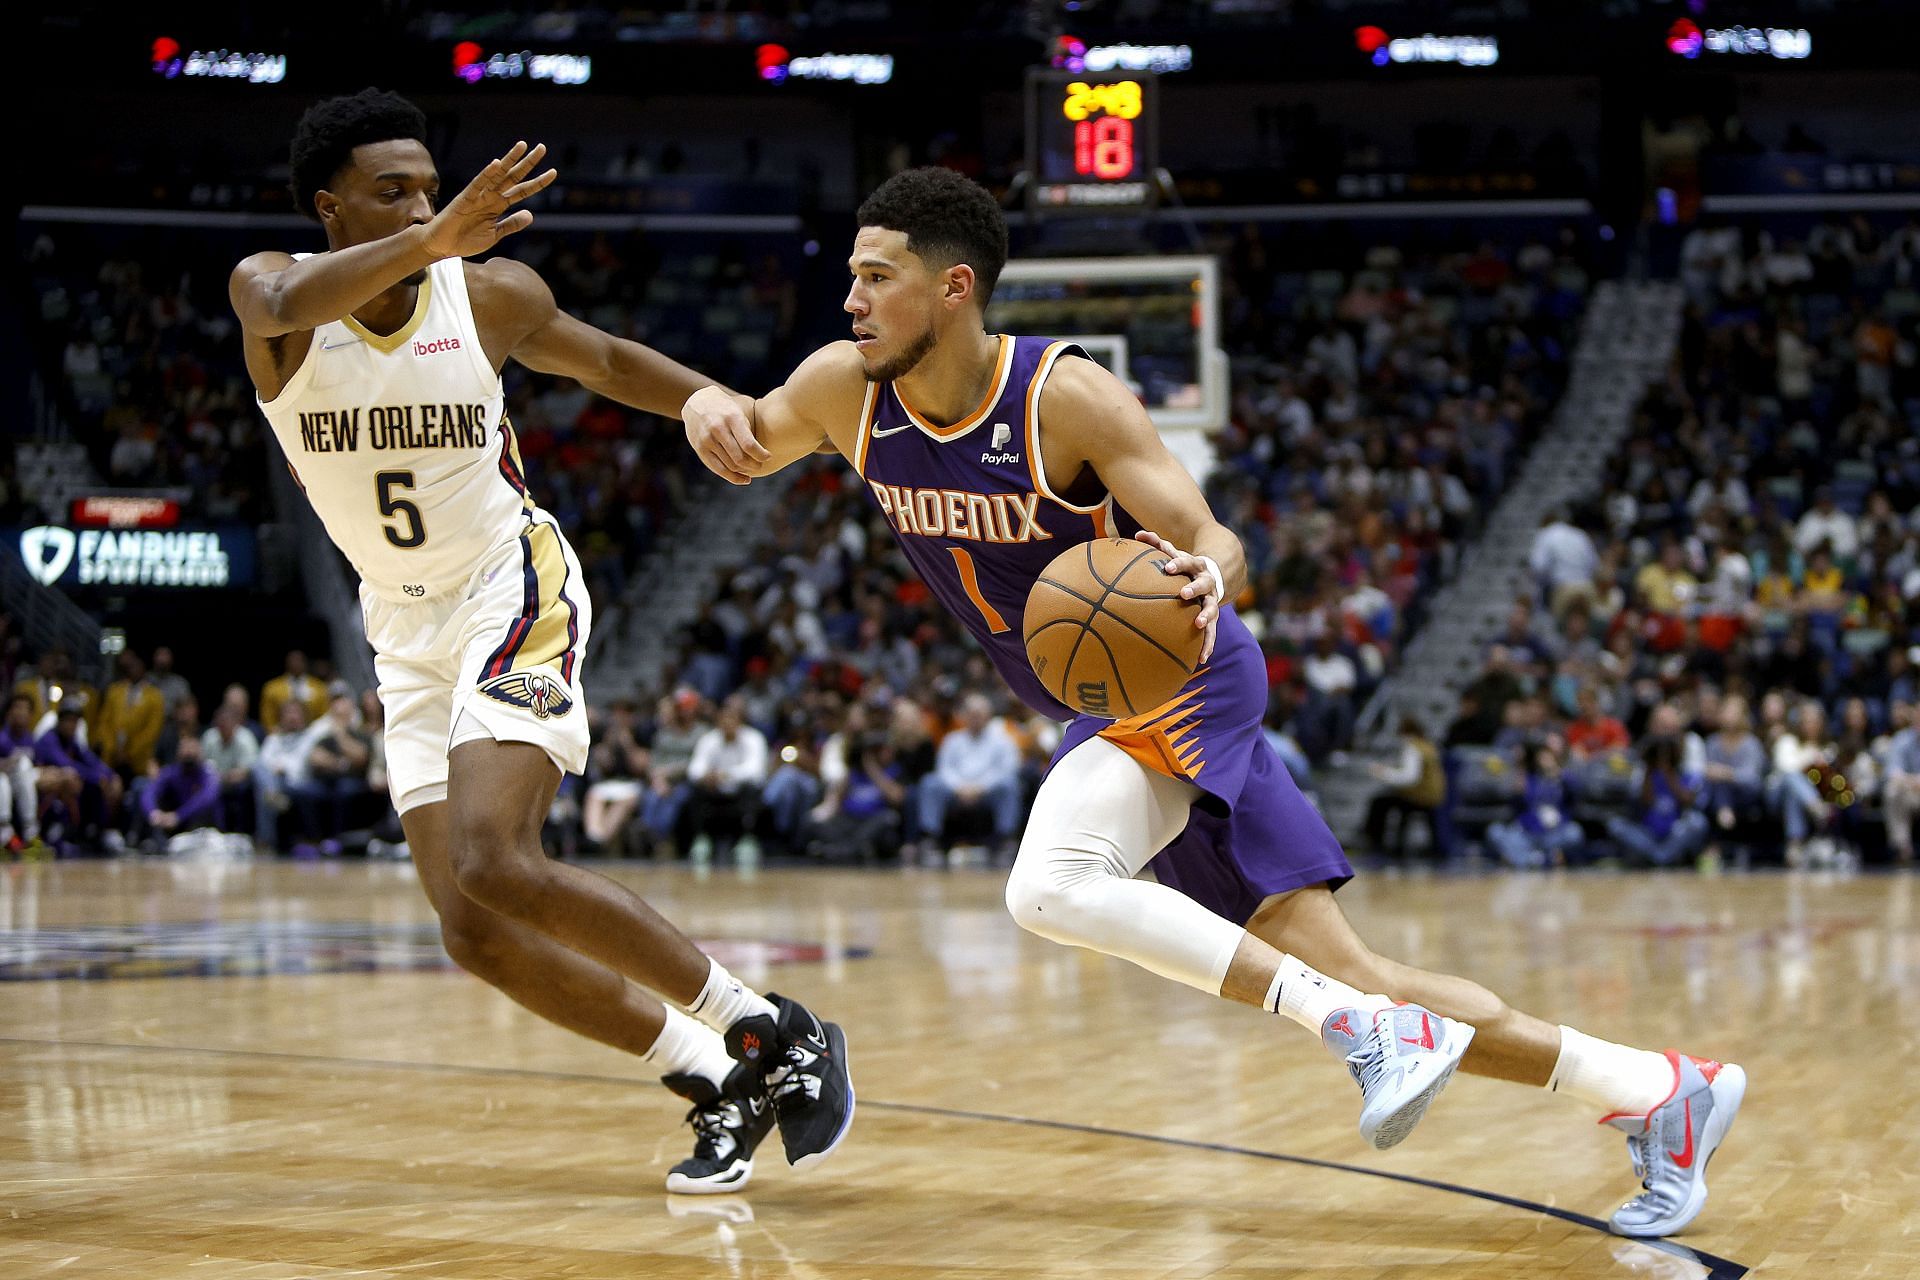 Devin Booker of the Suns is defended by Herbert Jones of the Pelicans